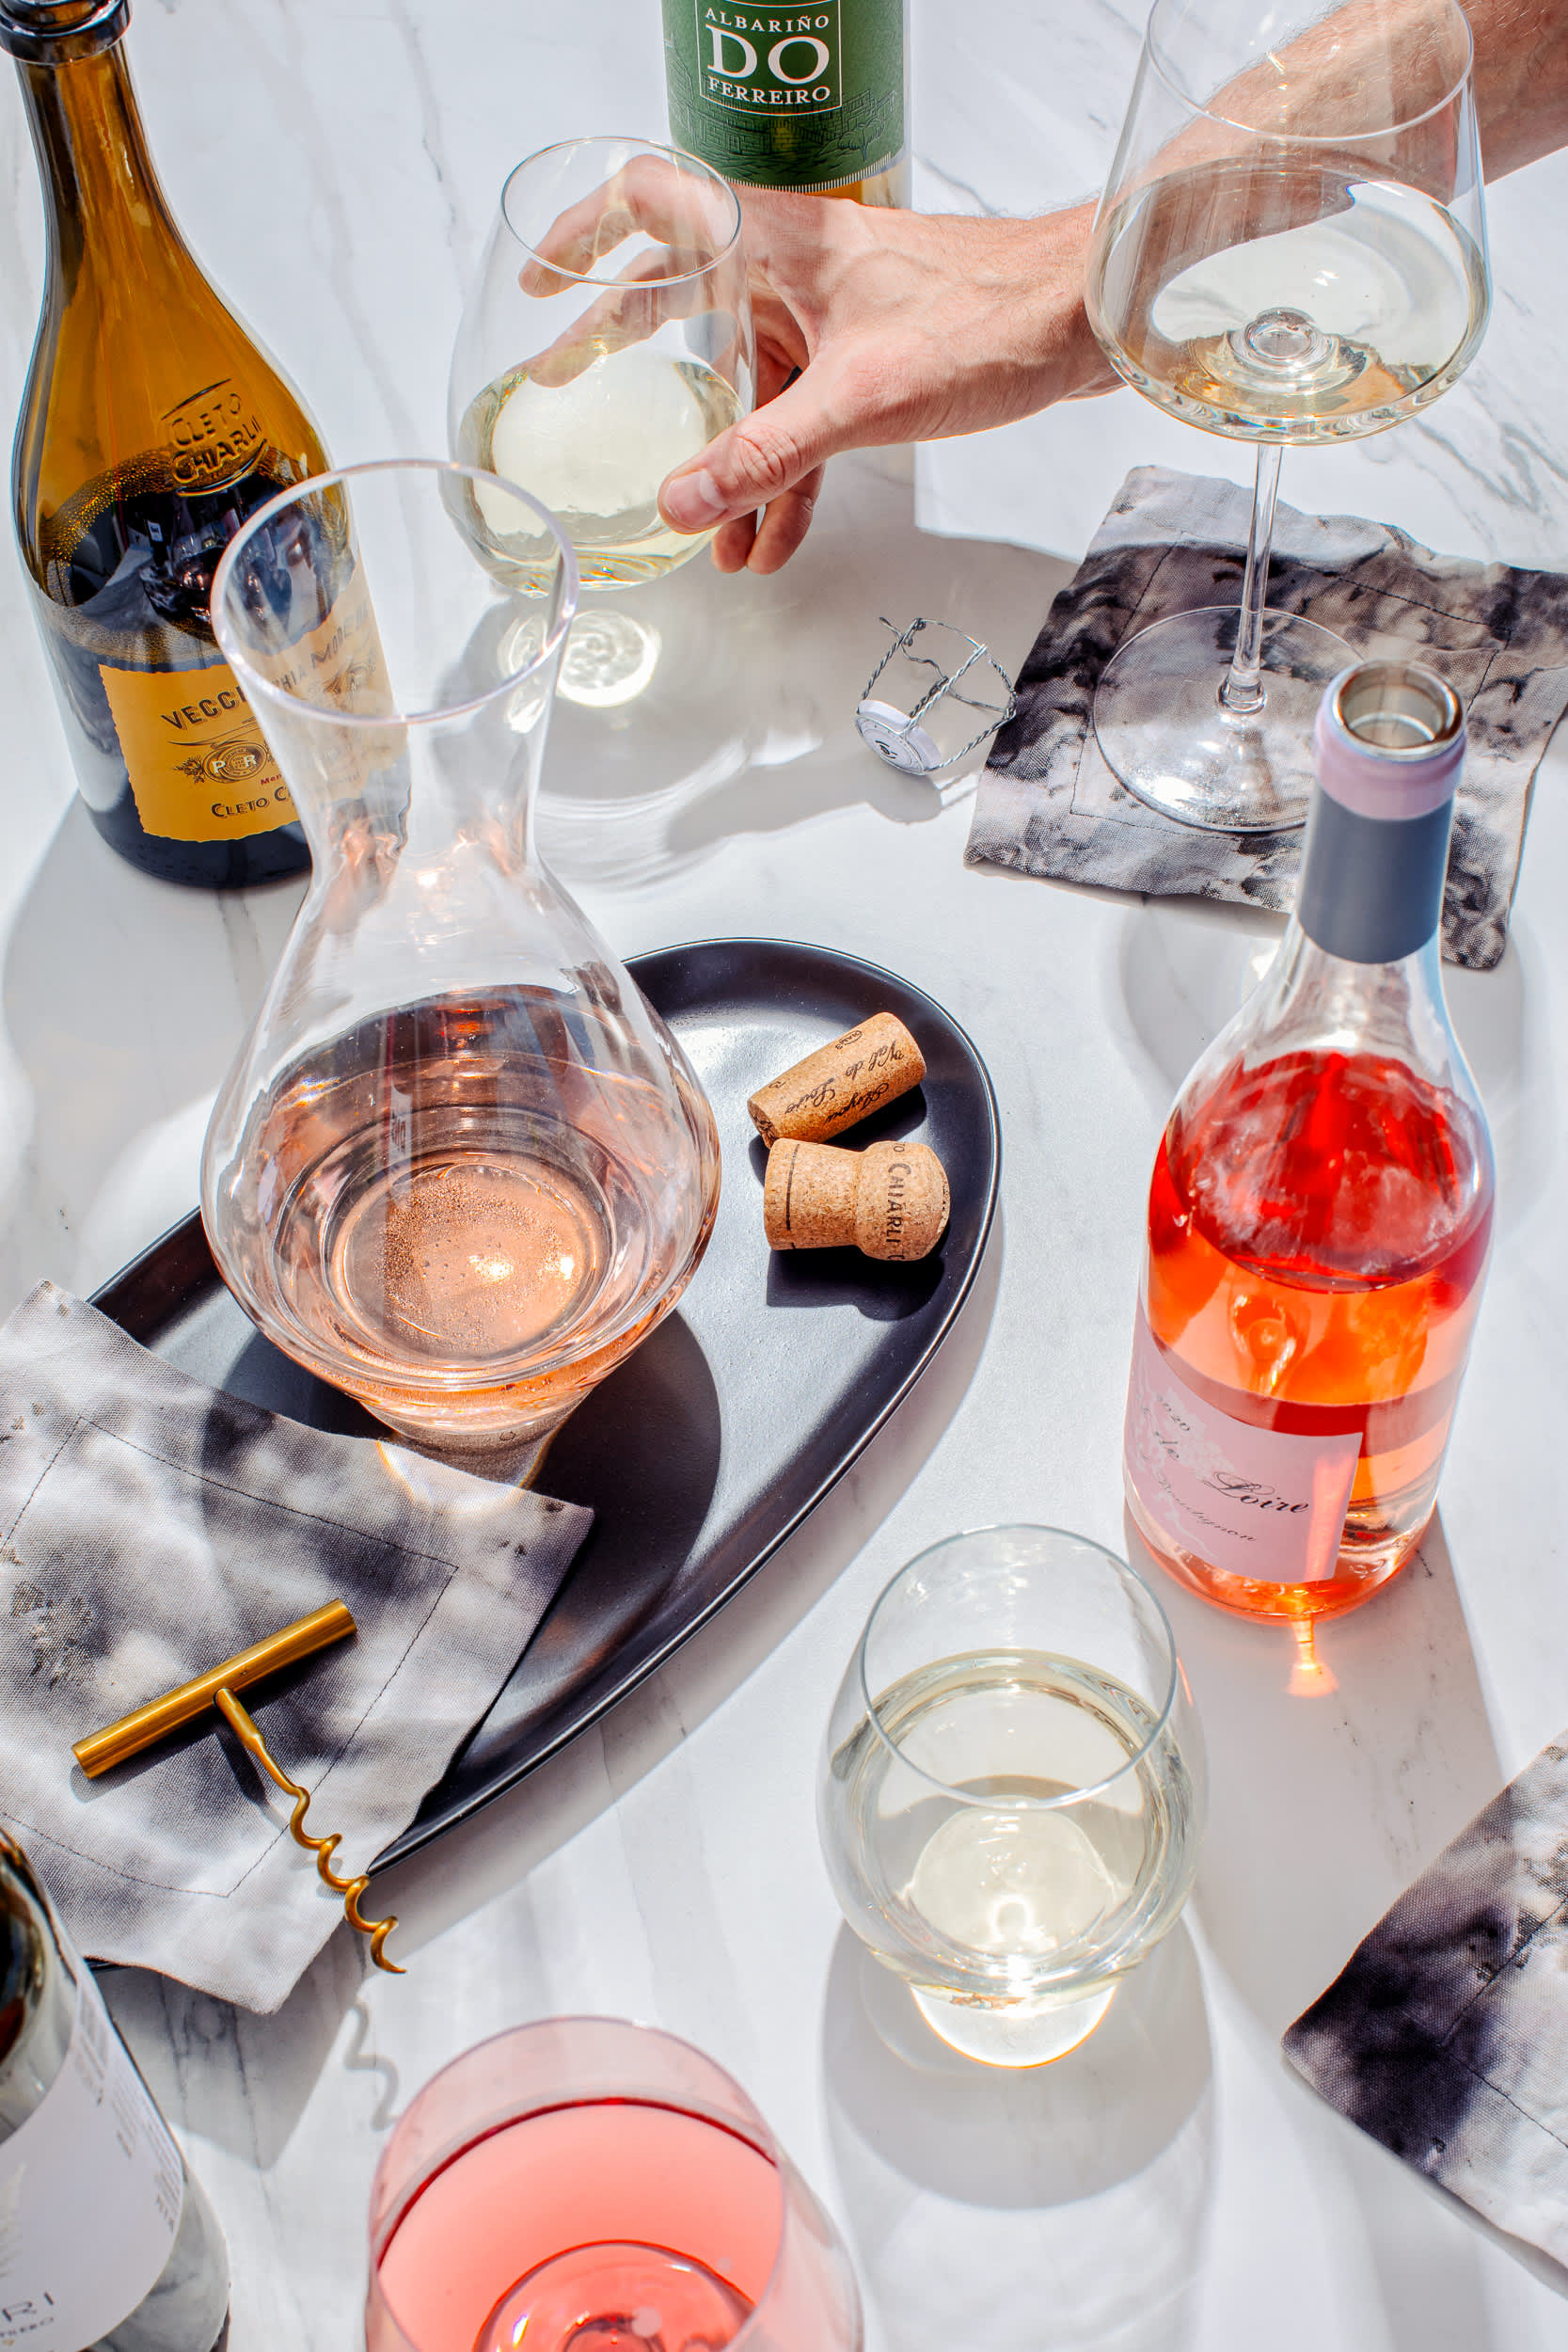 https://cdn.apartmenttherapy.info/image/upload/v1624478592/k/Photo/Lifestyle/2021-07-TK-Sommeliers-on-the-One-Wine-They%27re-Drinking-This-Summer/Kitchn-2021-Sommelier-Summer-Wine-3.jpg